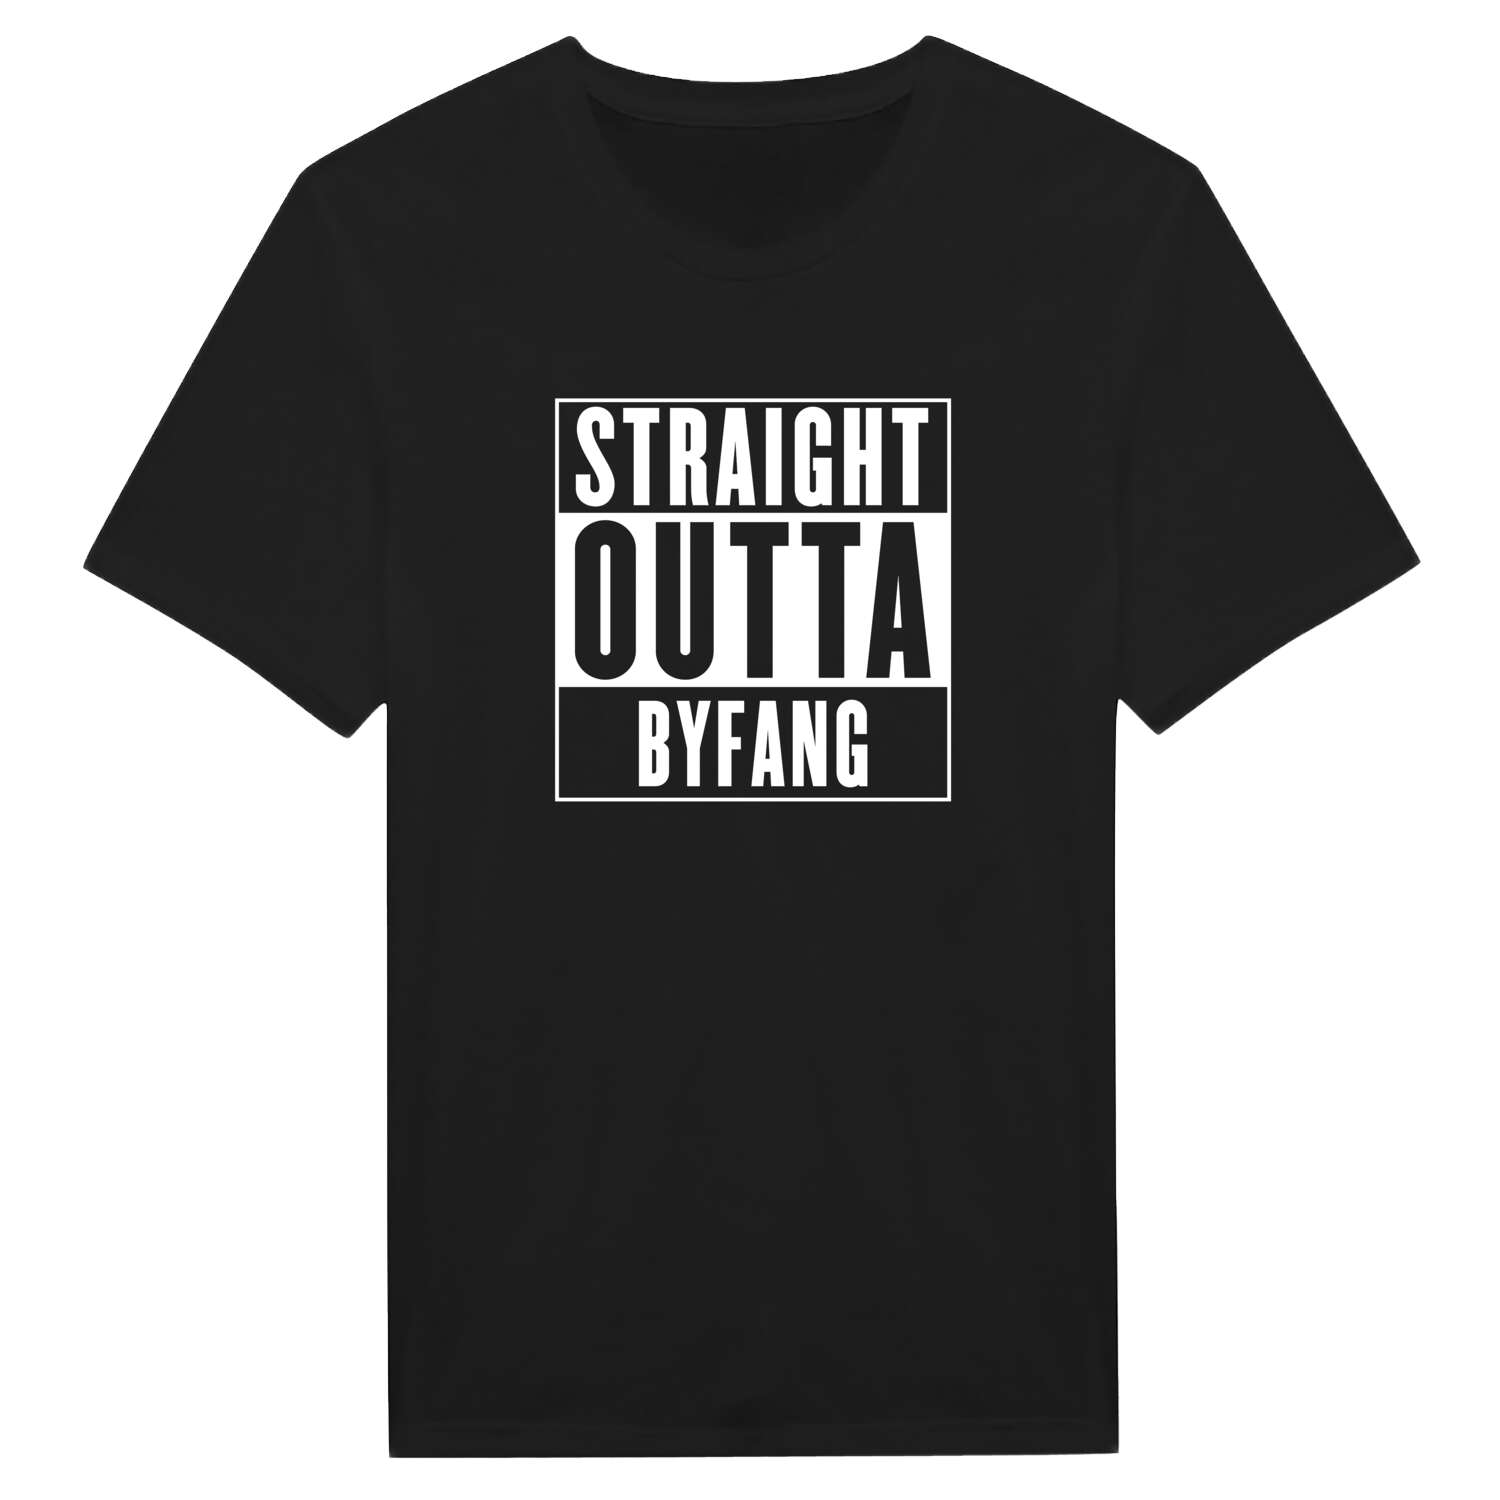 Byfang T-Shirt »Straight Outta«